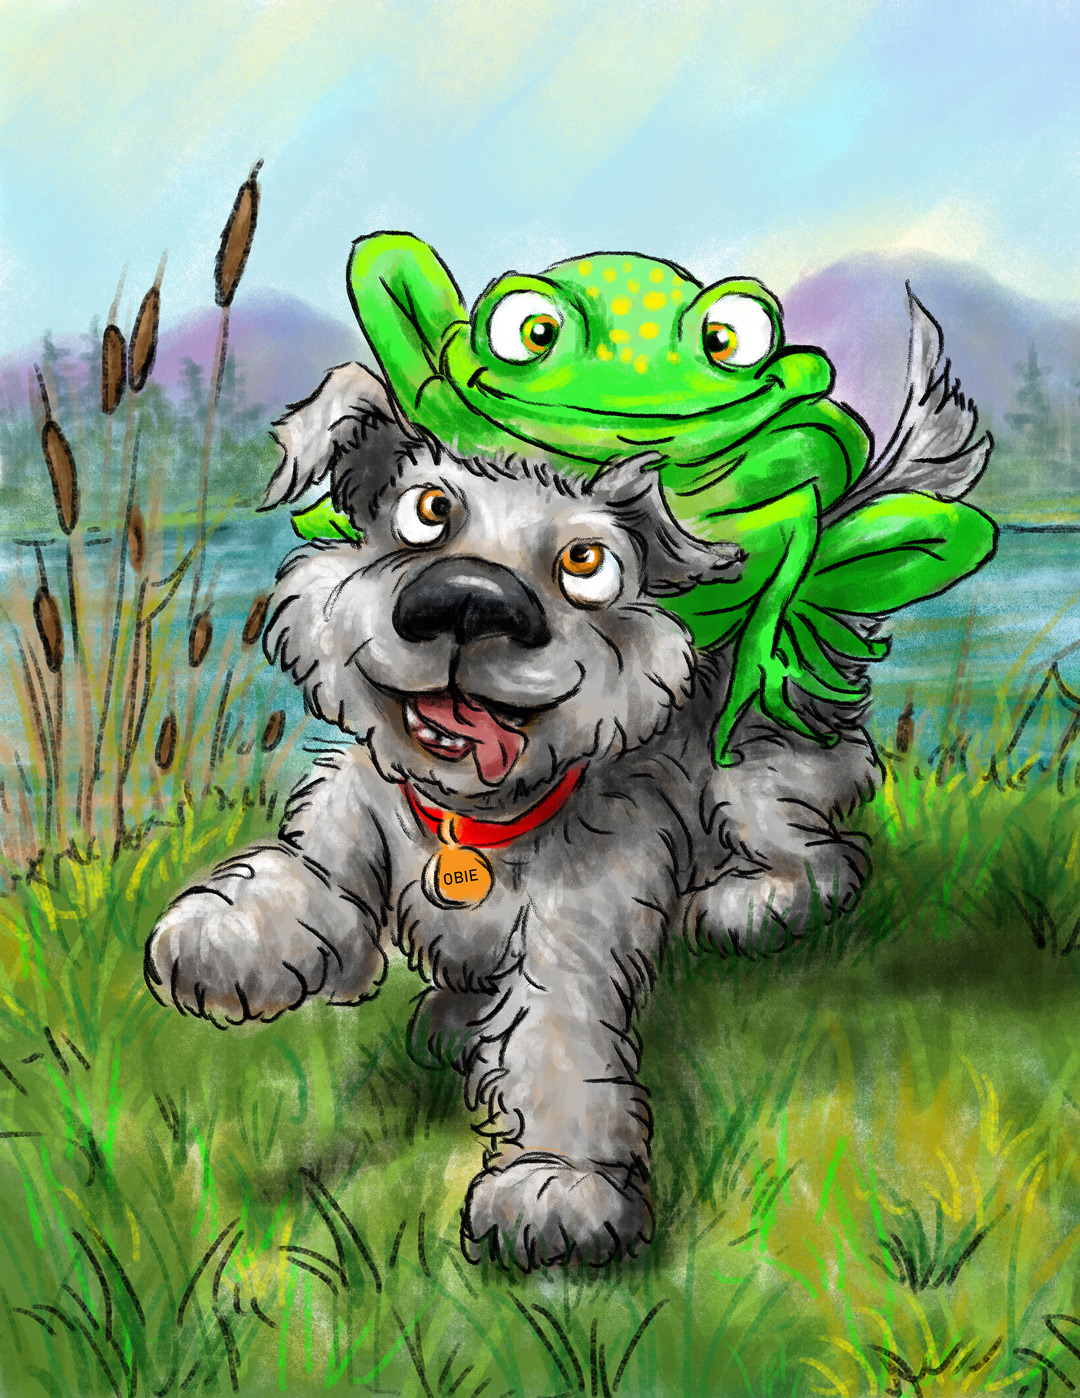 A cartoony speckled frog rides on the back of a silly looking gray dog.